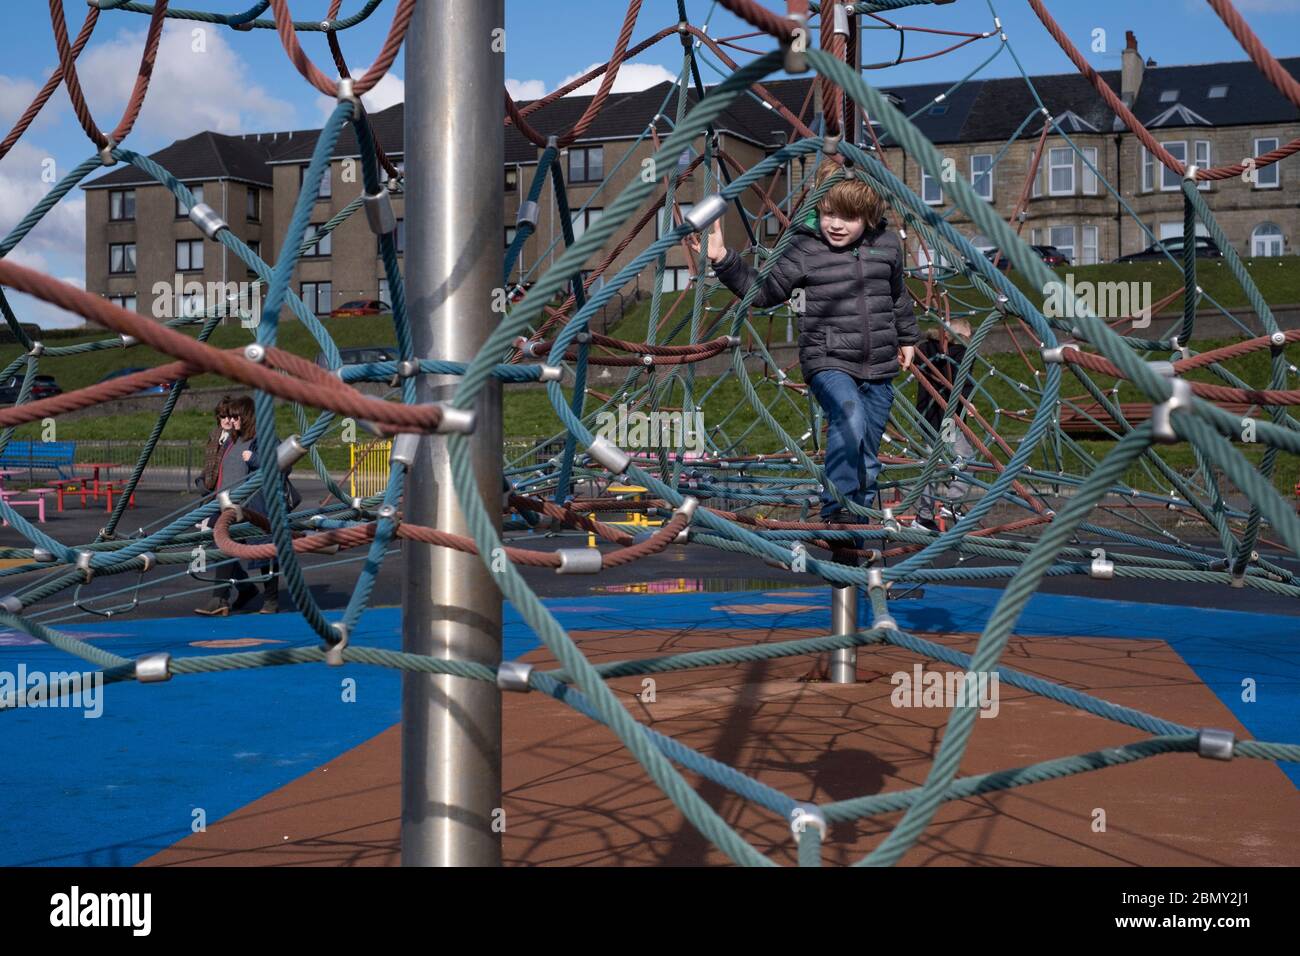 A young boy playing on a climbing frame. Stock Photo